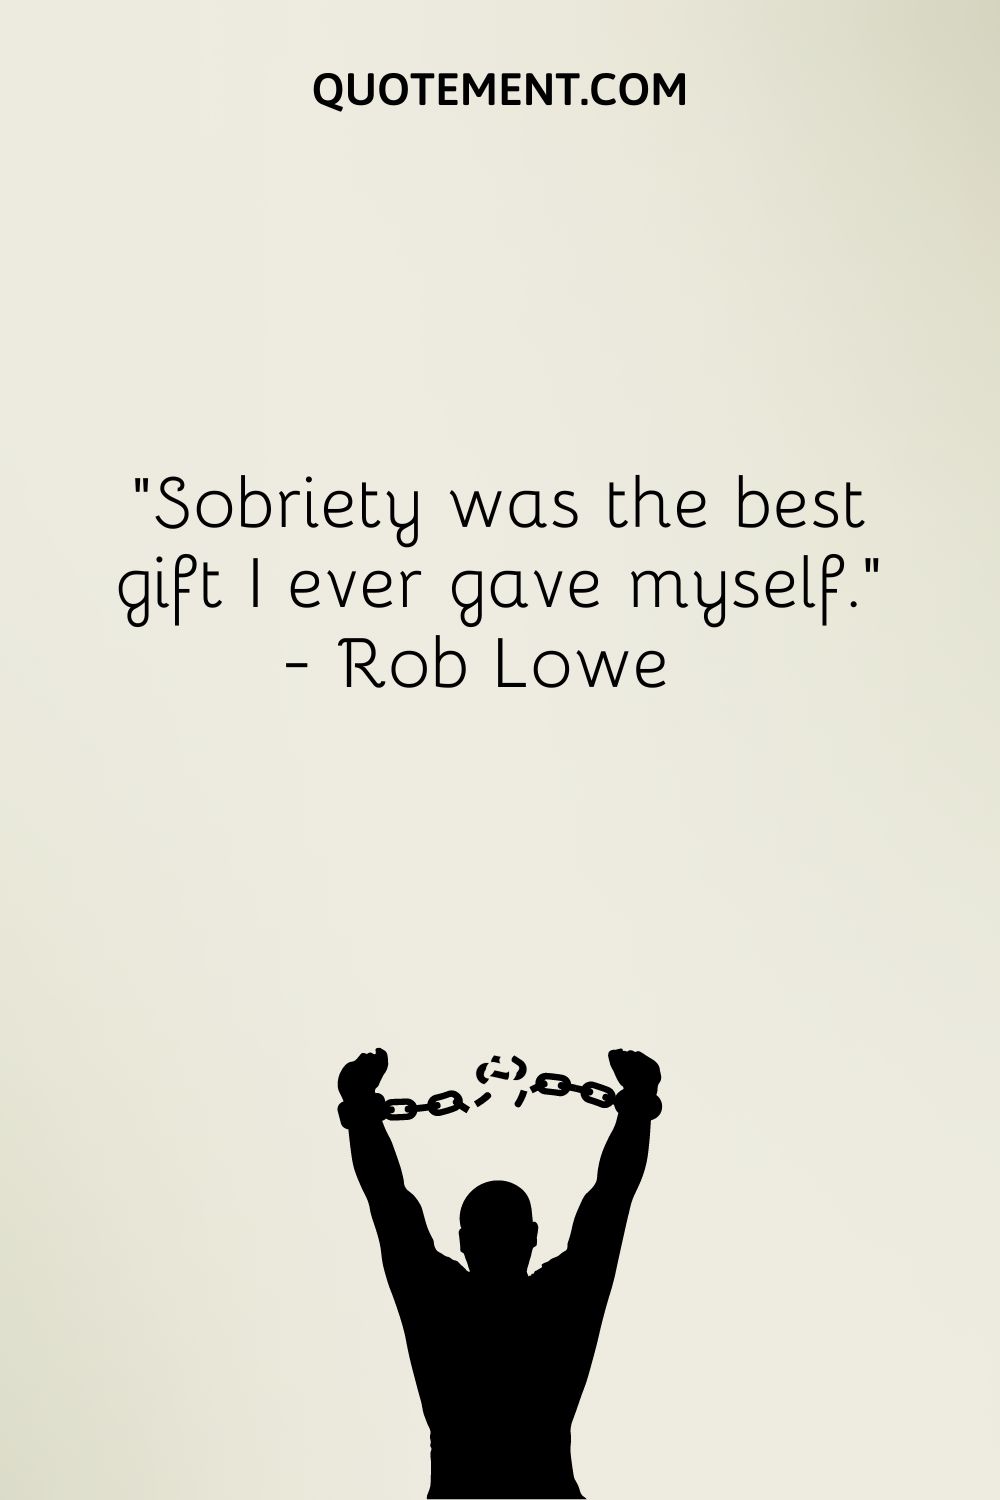 Sobriety was the best gift I ever gave myself